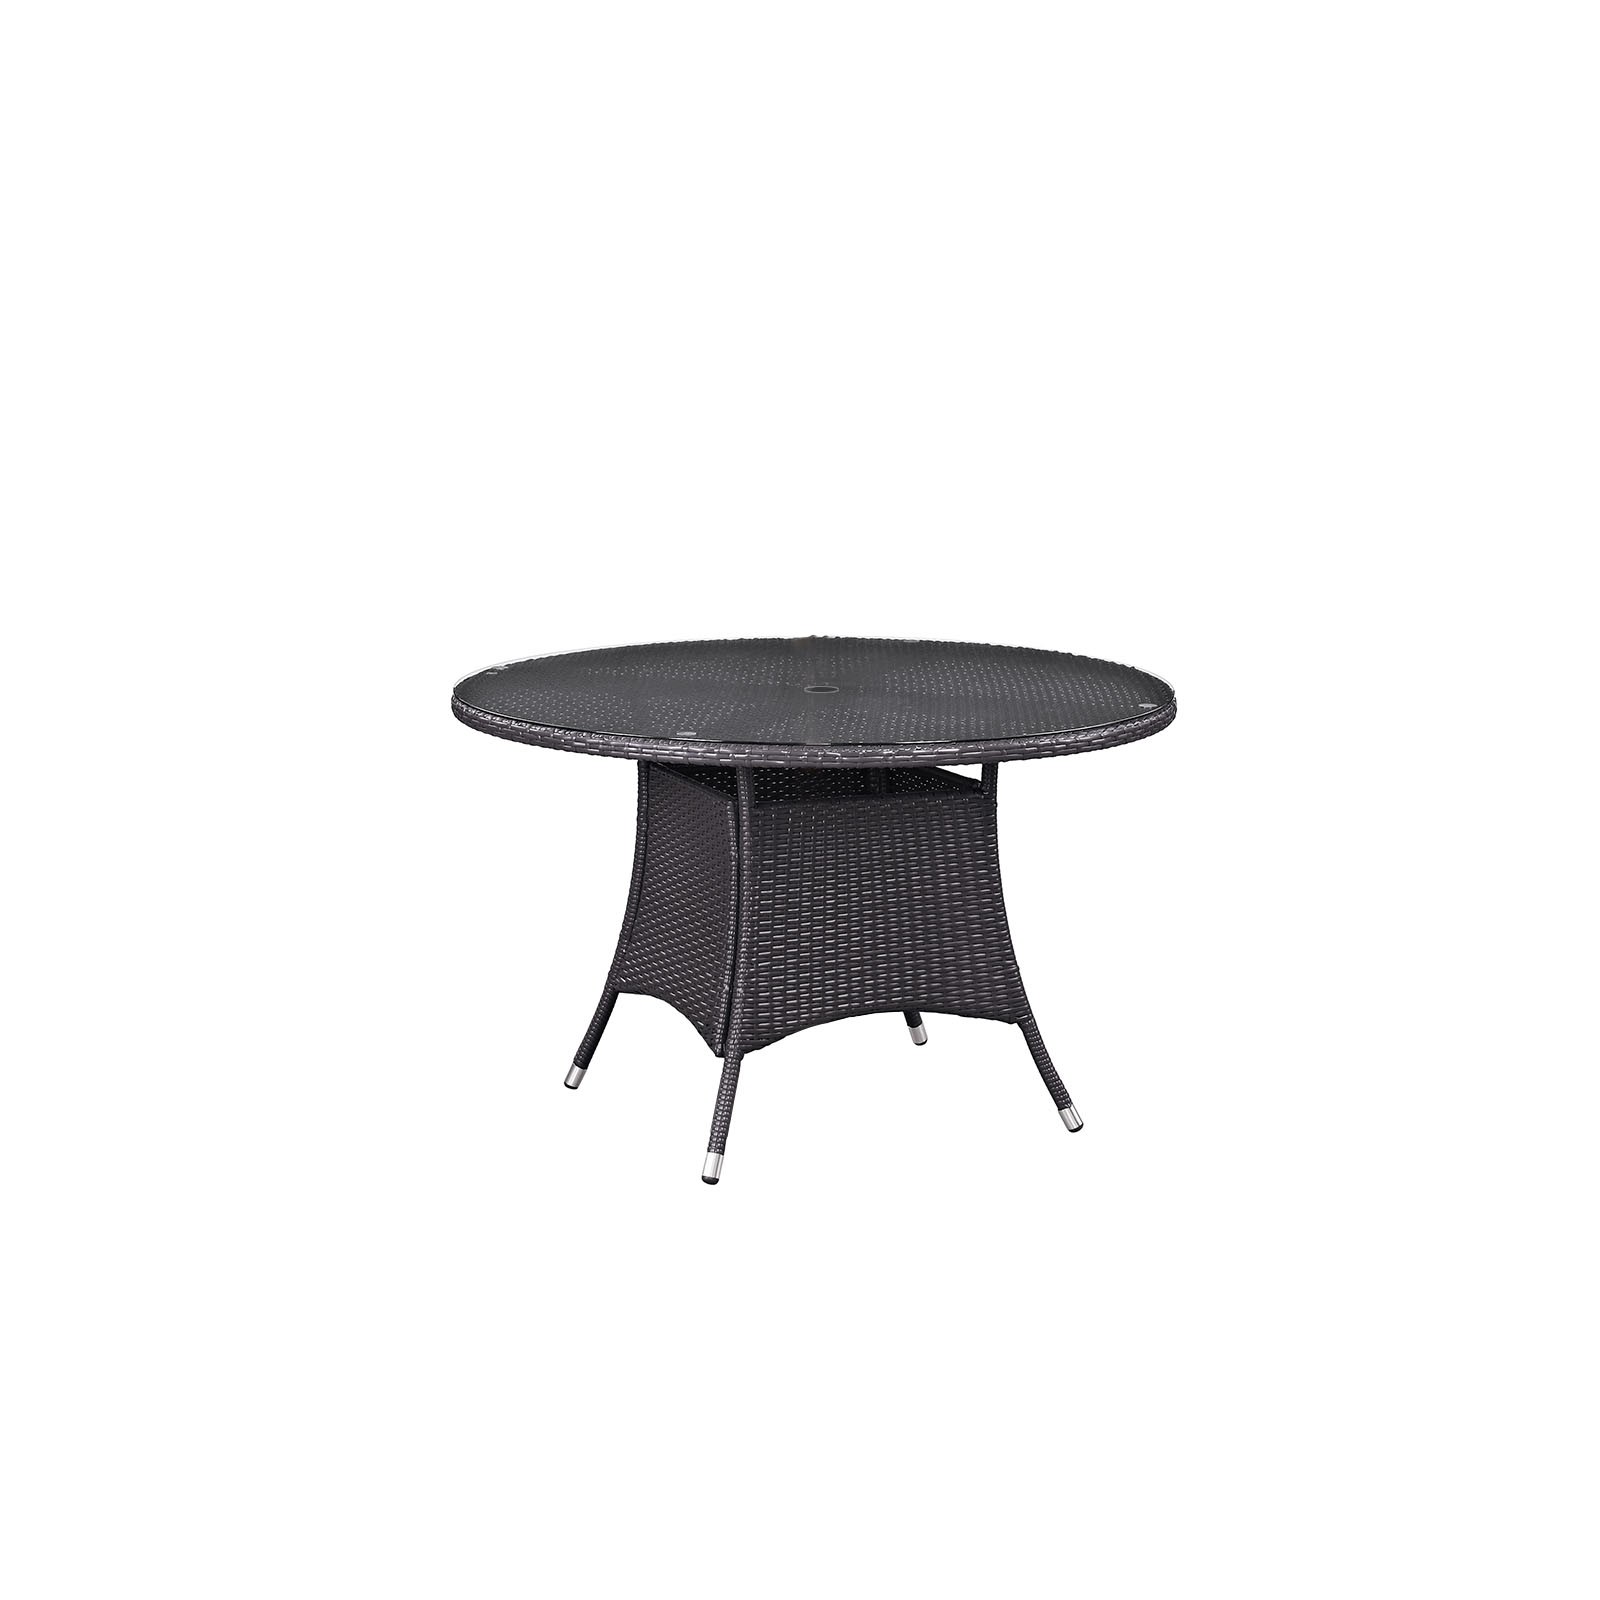 Convene 47" Round Outdoor Patio Dining Table